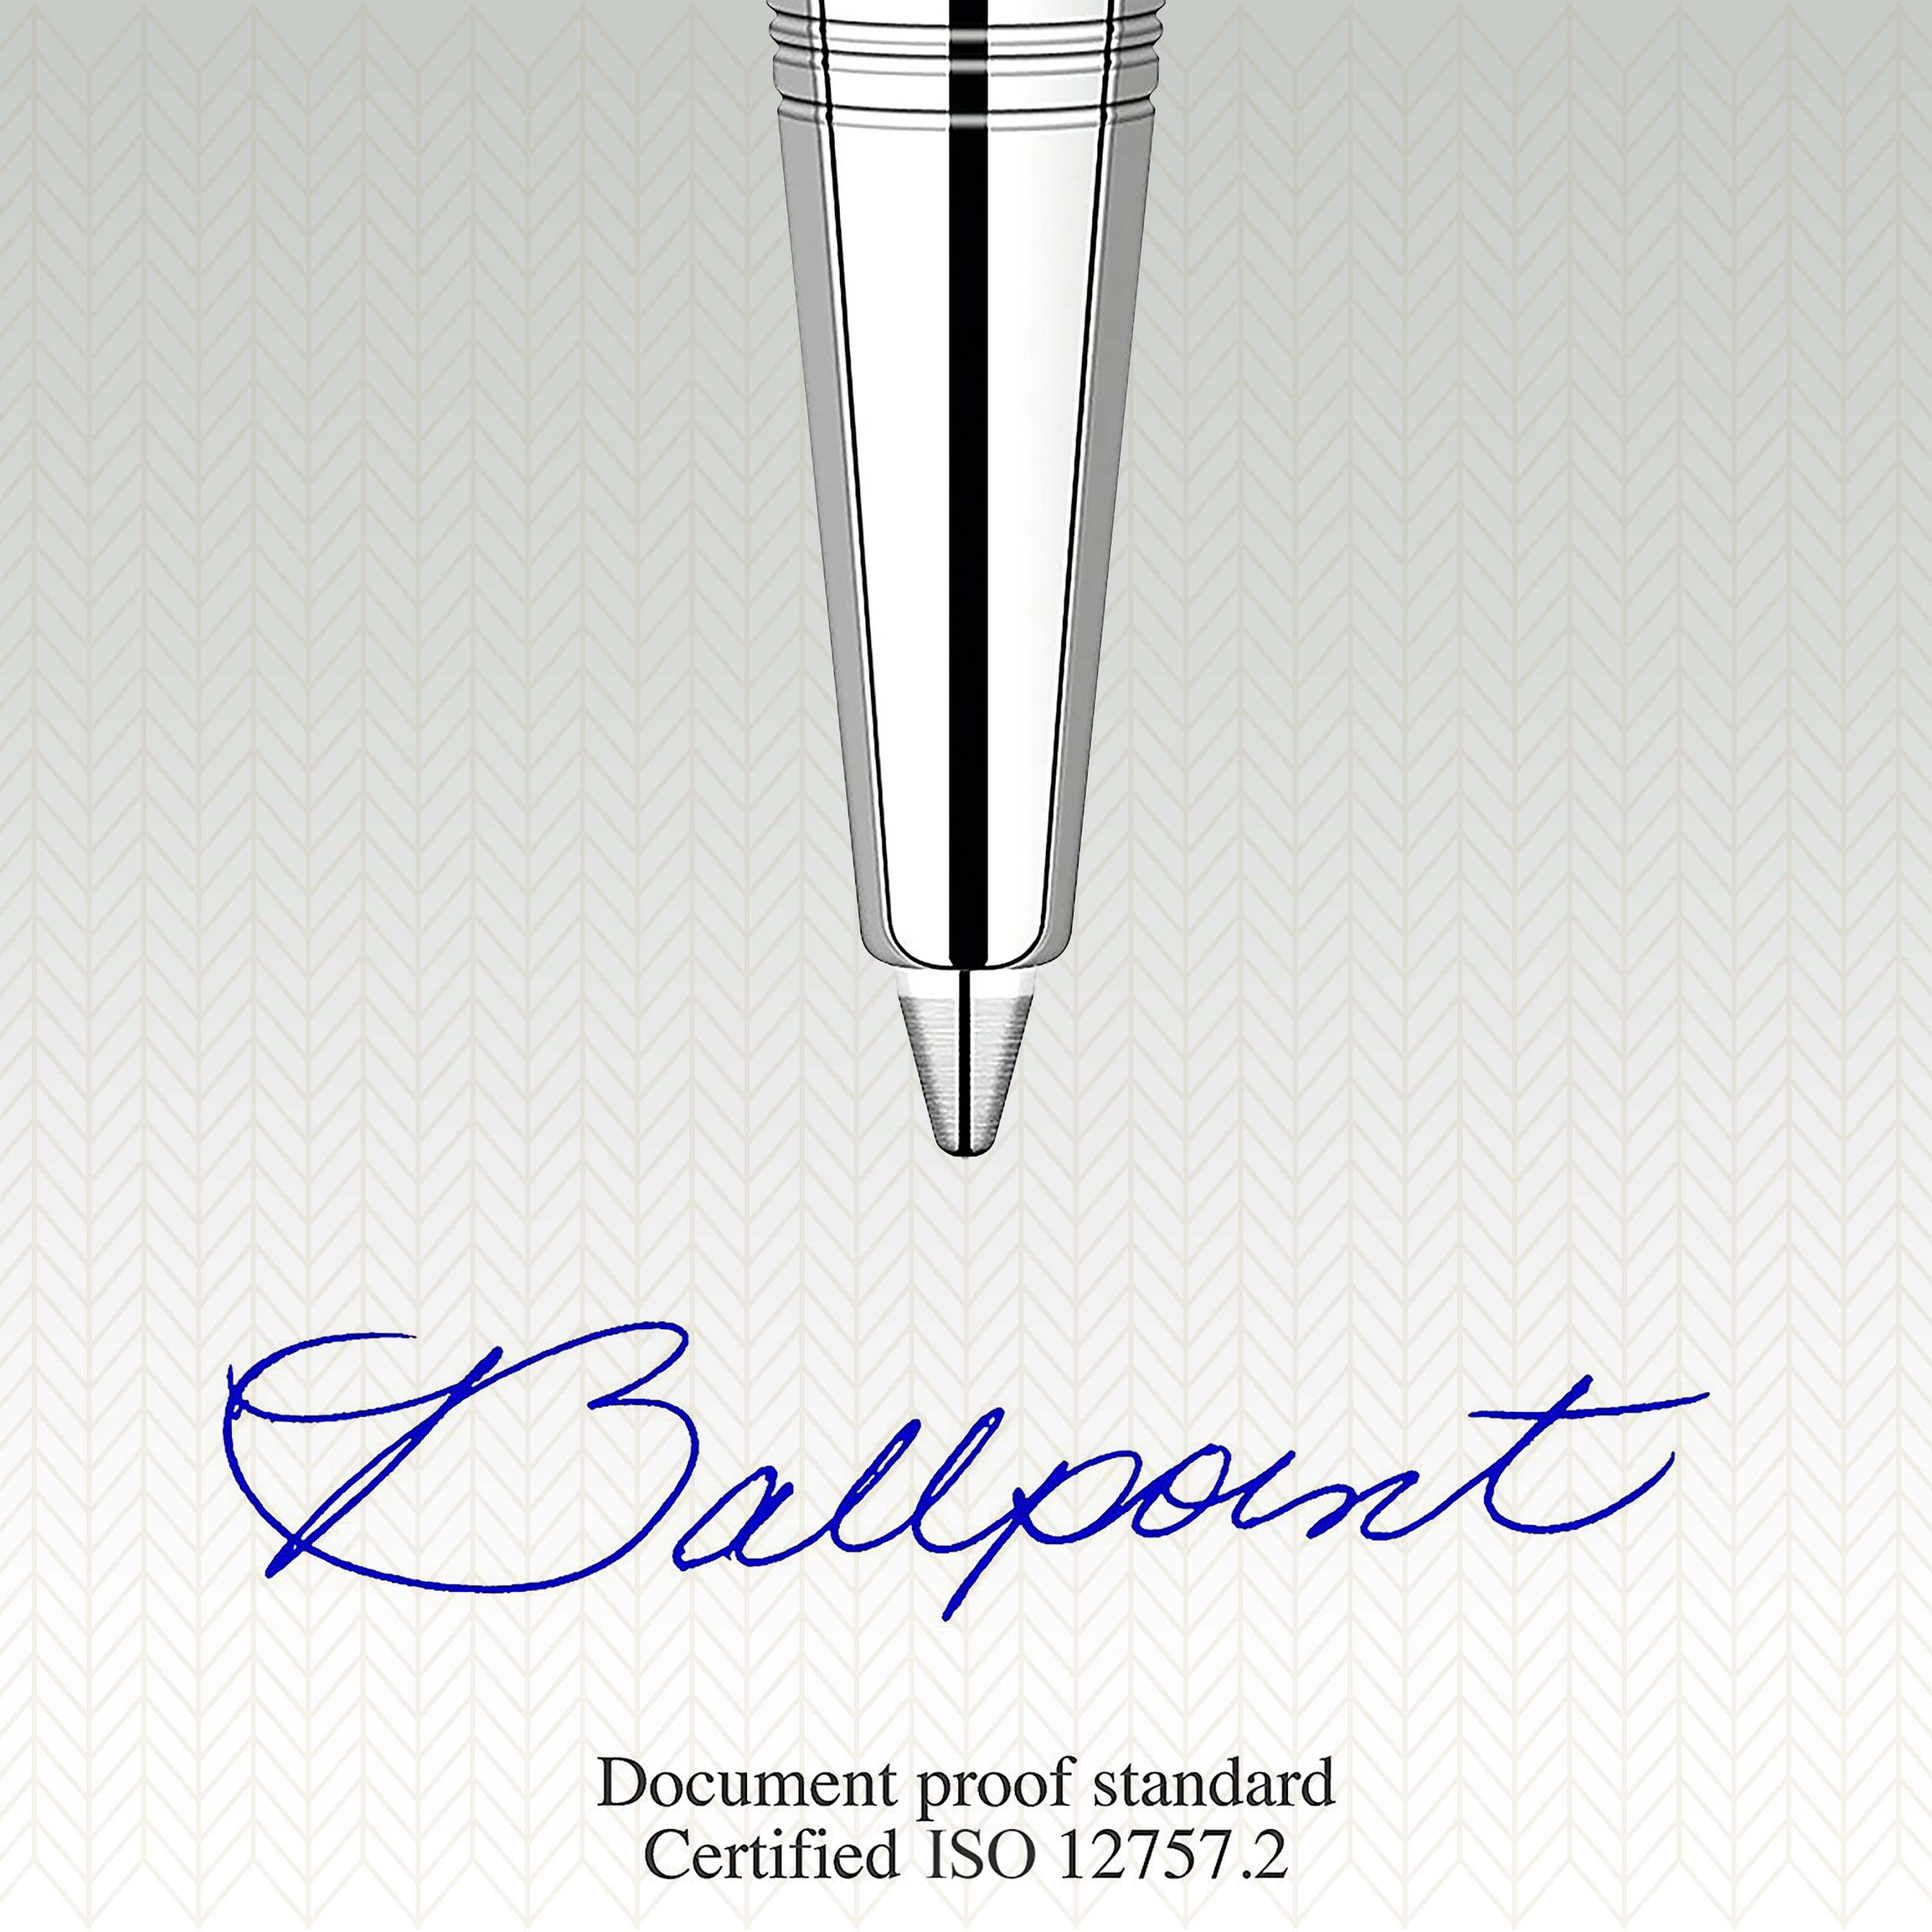 Parker Refill Ballpoint - Pencraft the boutique